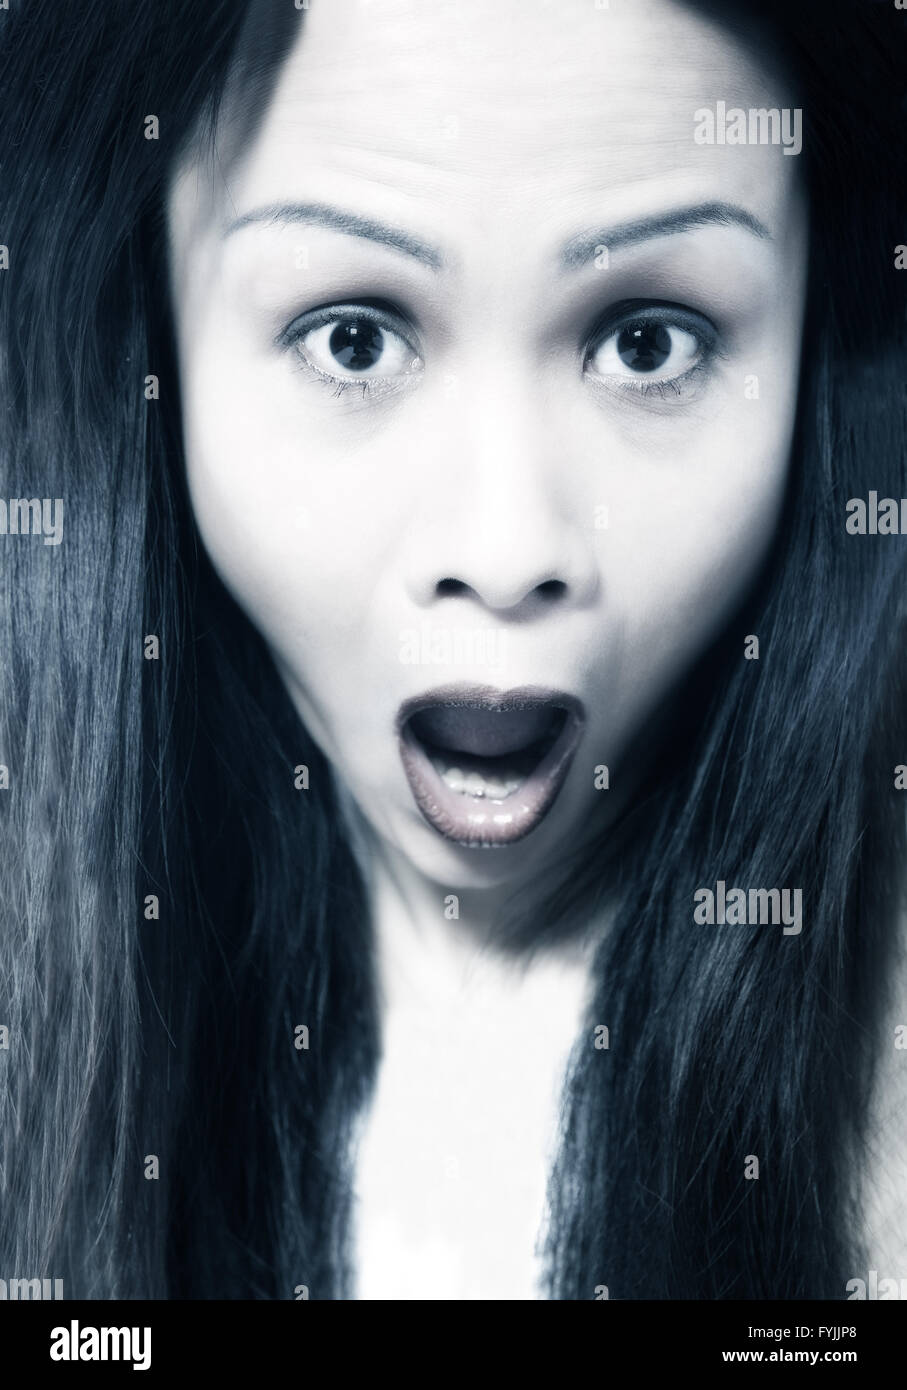 Asian girl being scary Stock Photo